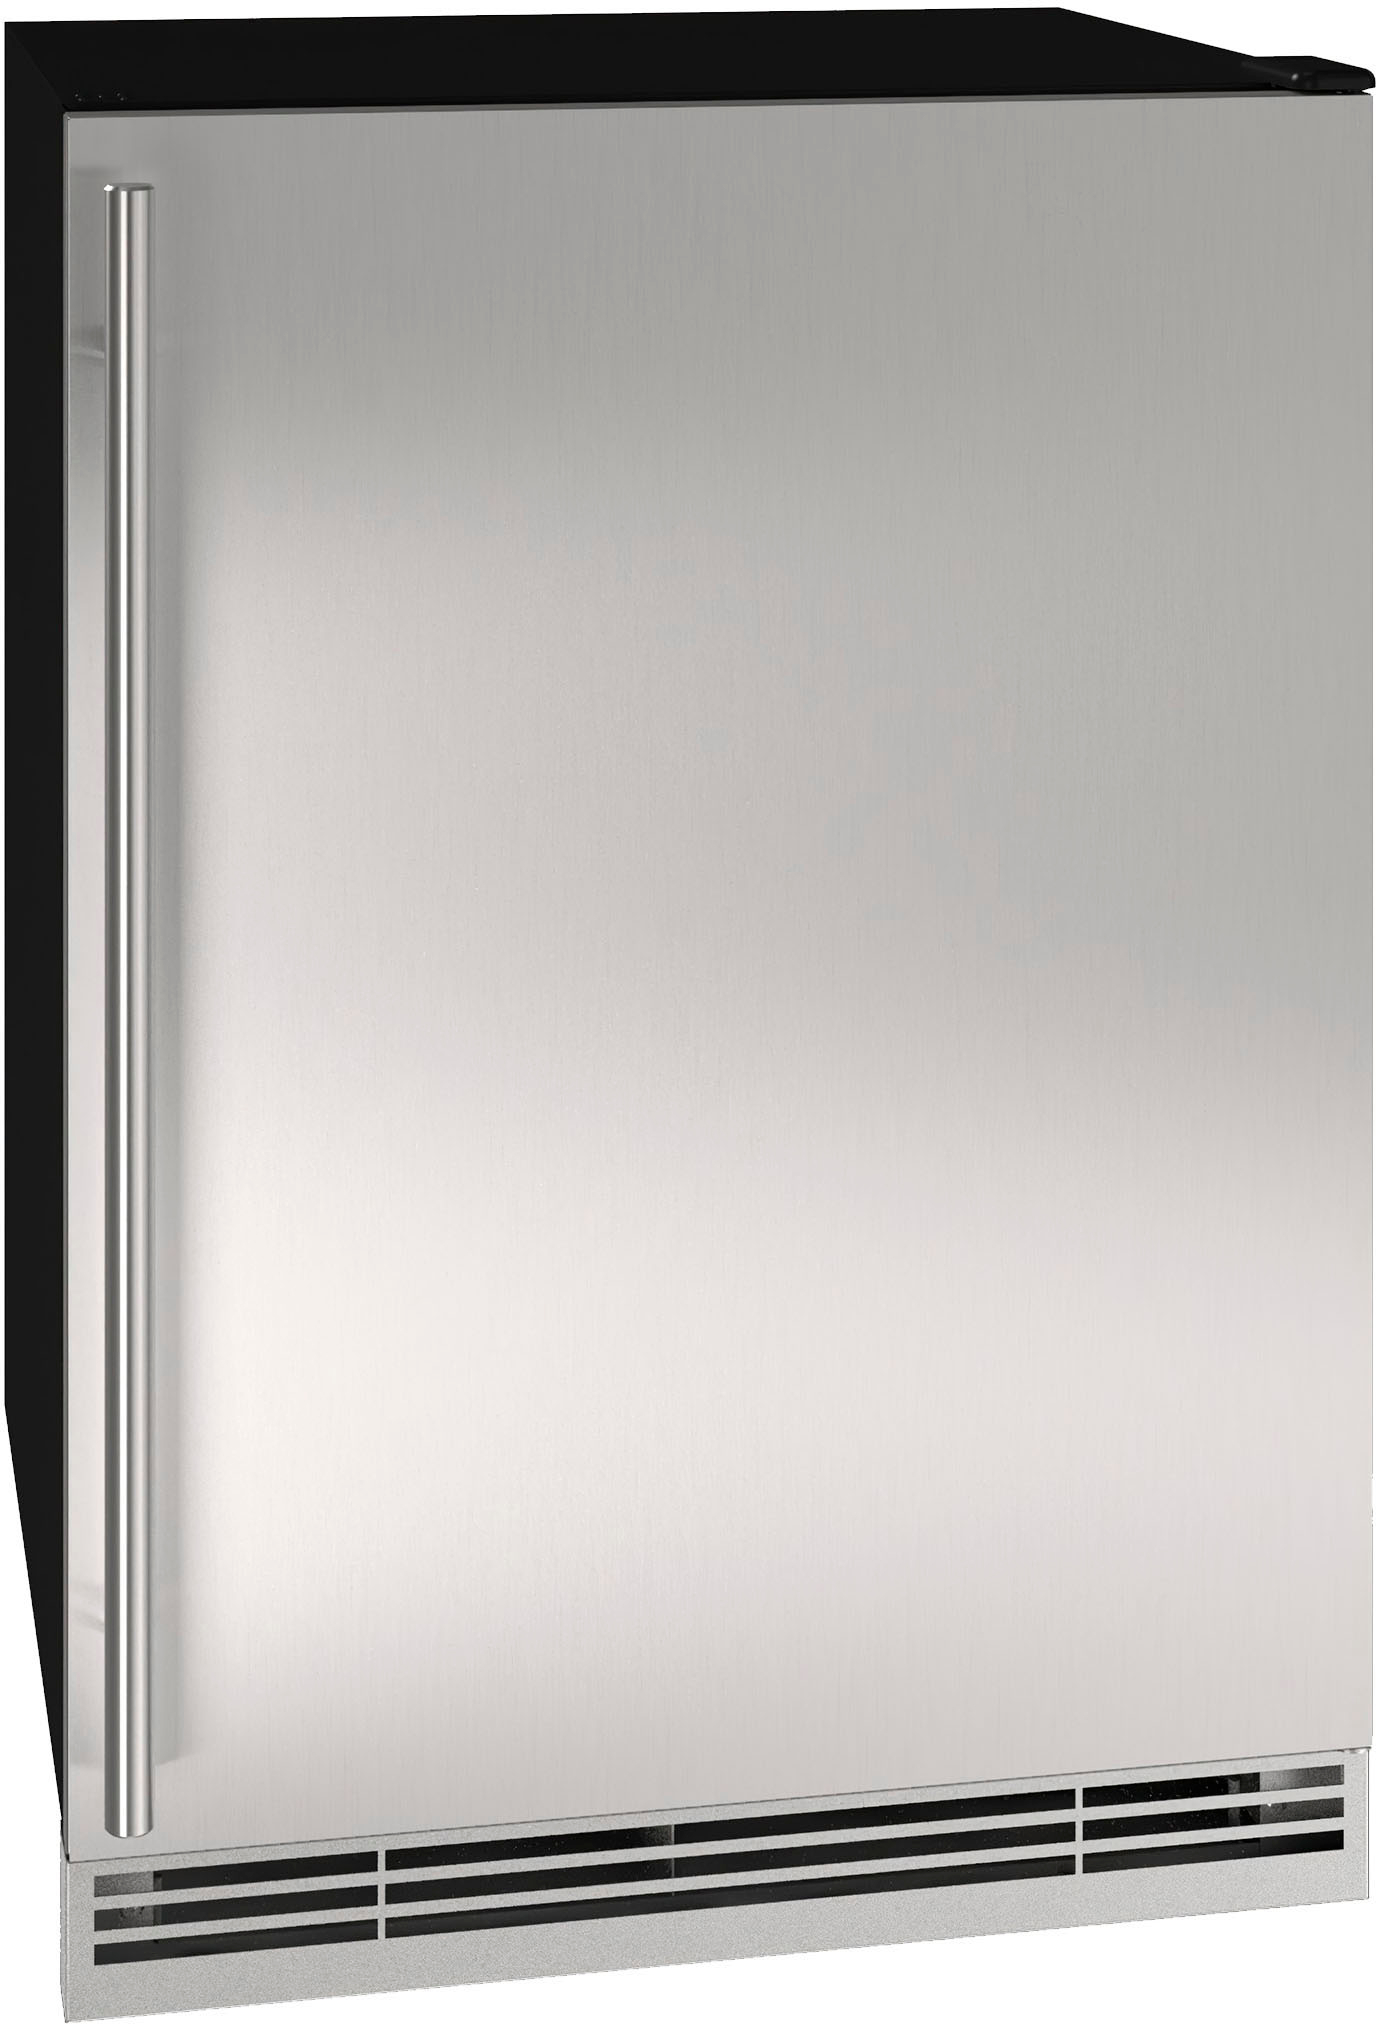 Angle View: U-Line - 1 Class 24" 4.8 Cu. Ft. Convertible Freezer - Stainless steel